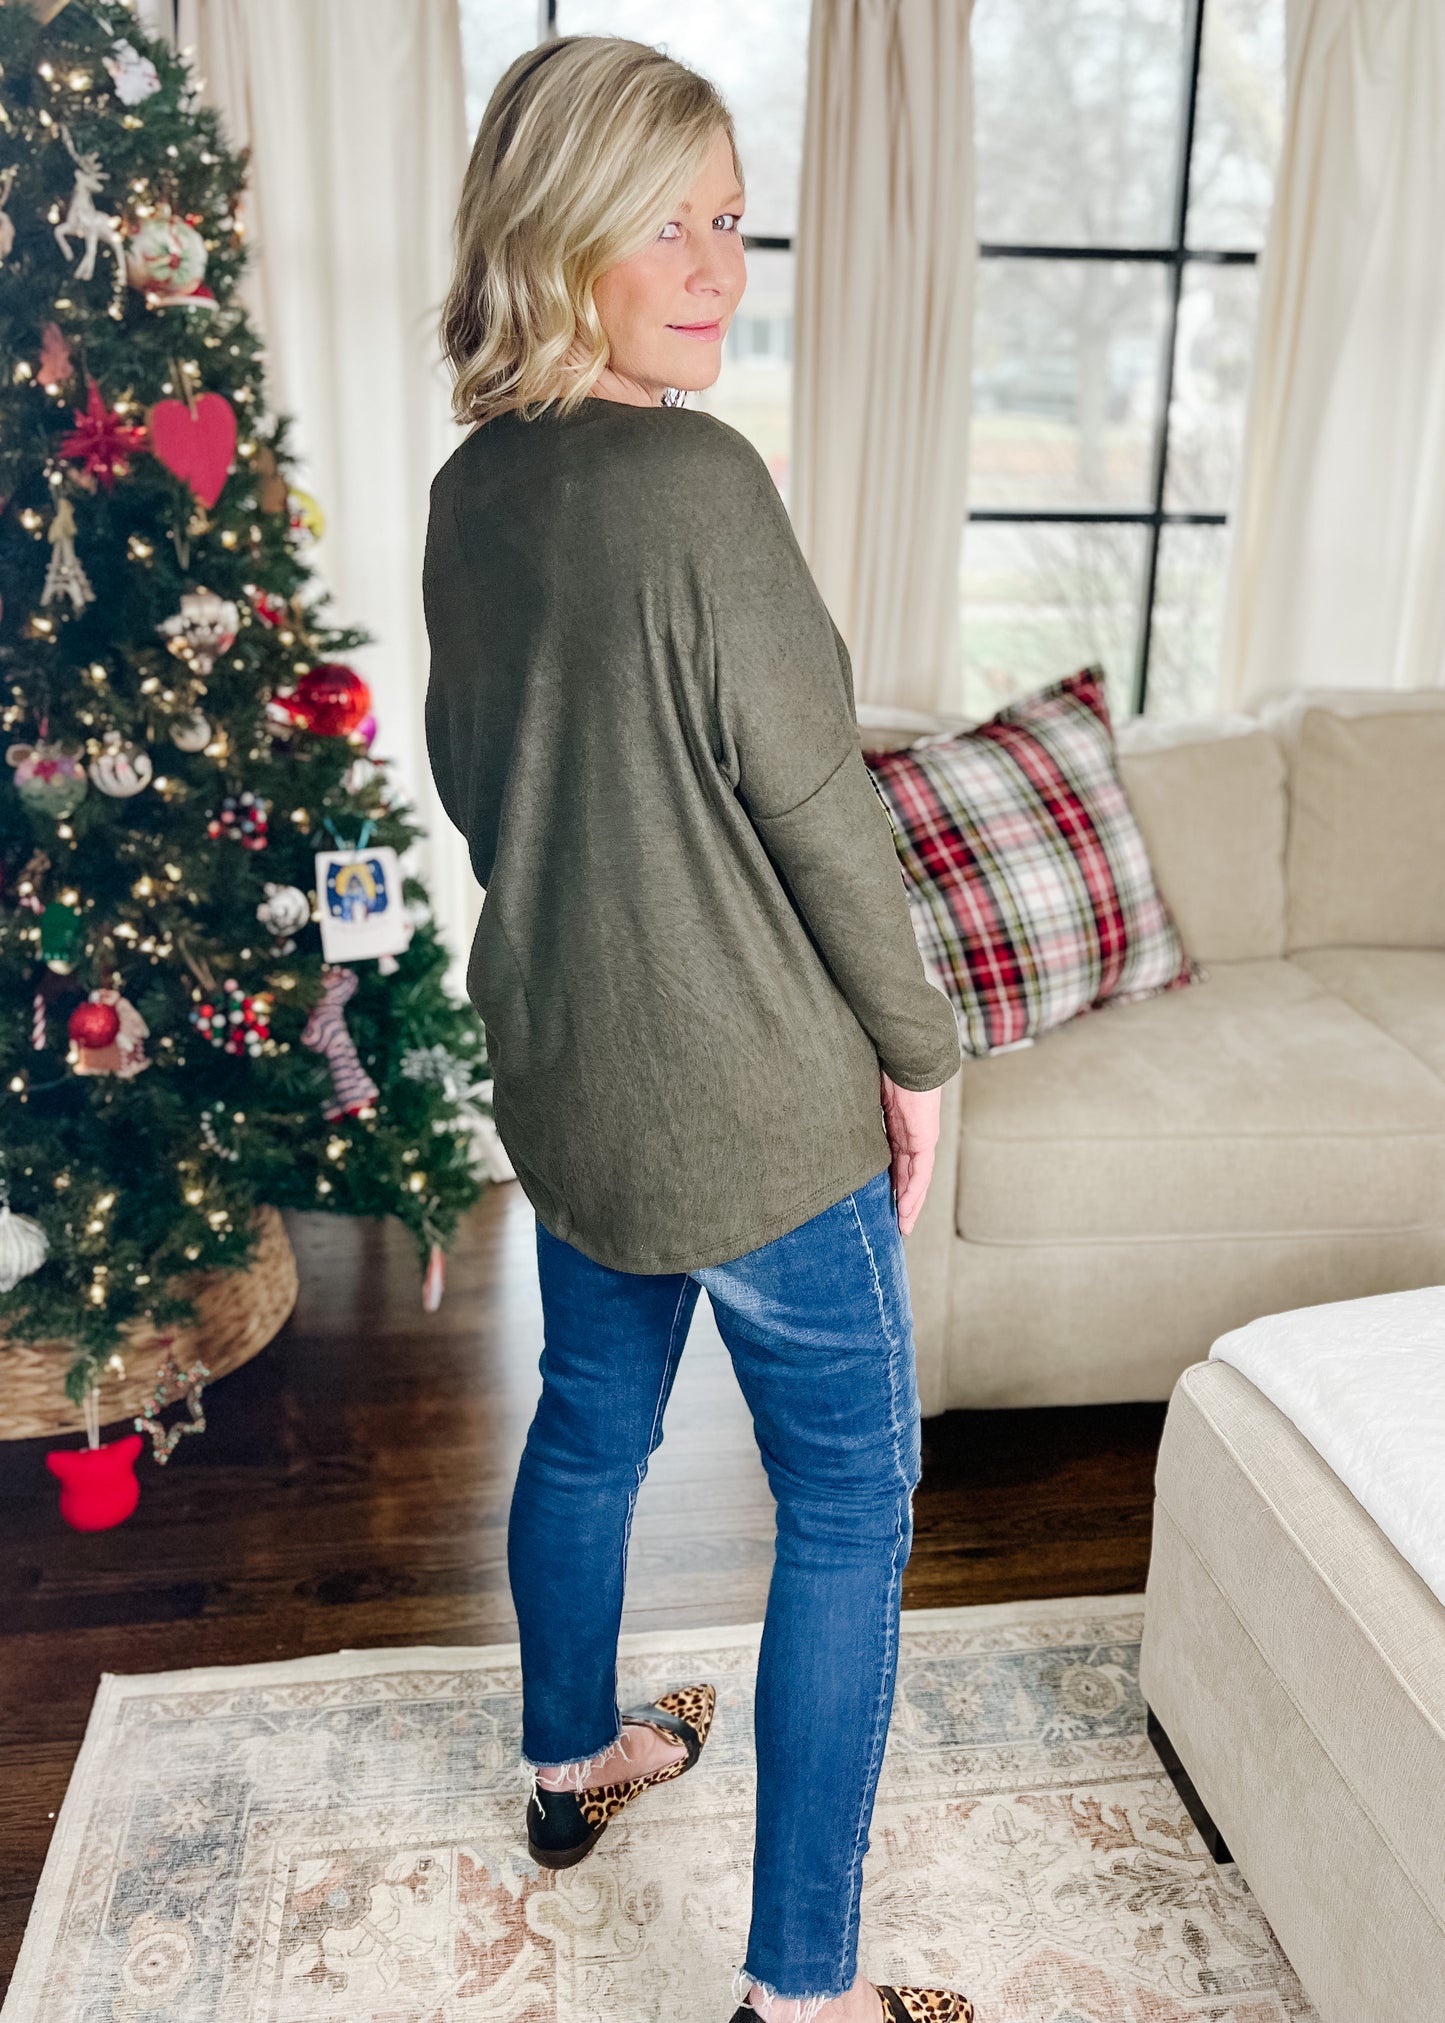 Soft brushed top that can be worn on or off the shoulder, tunic length, sl I'm fitted sleeves with drop shoulder. Available in ruby and olive.